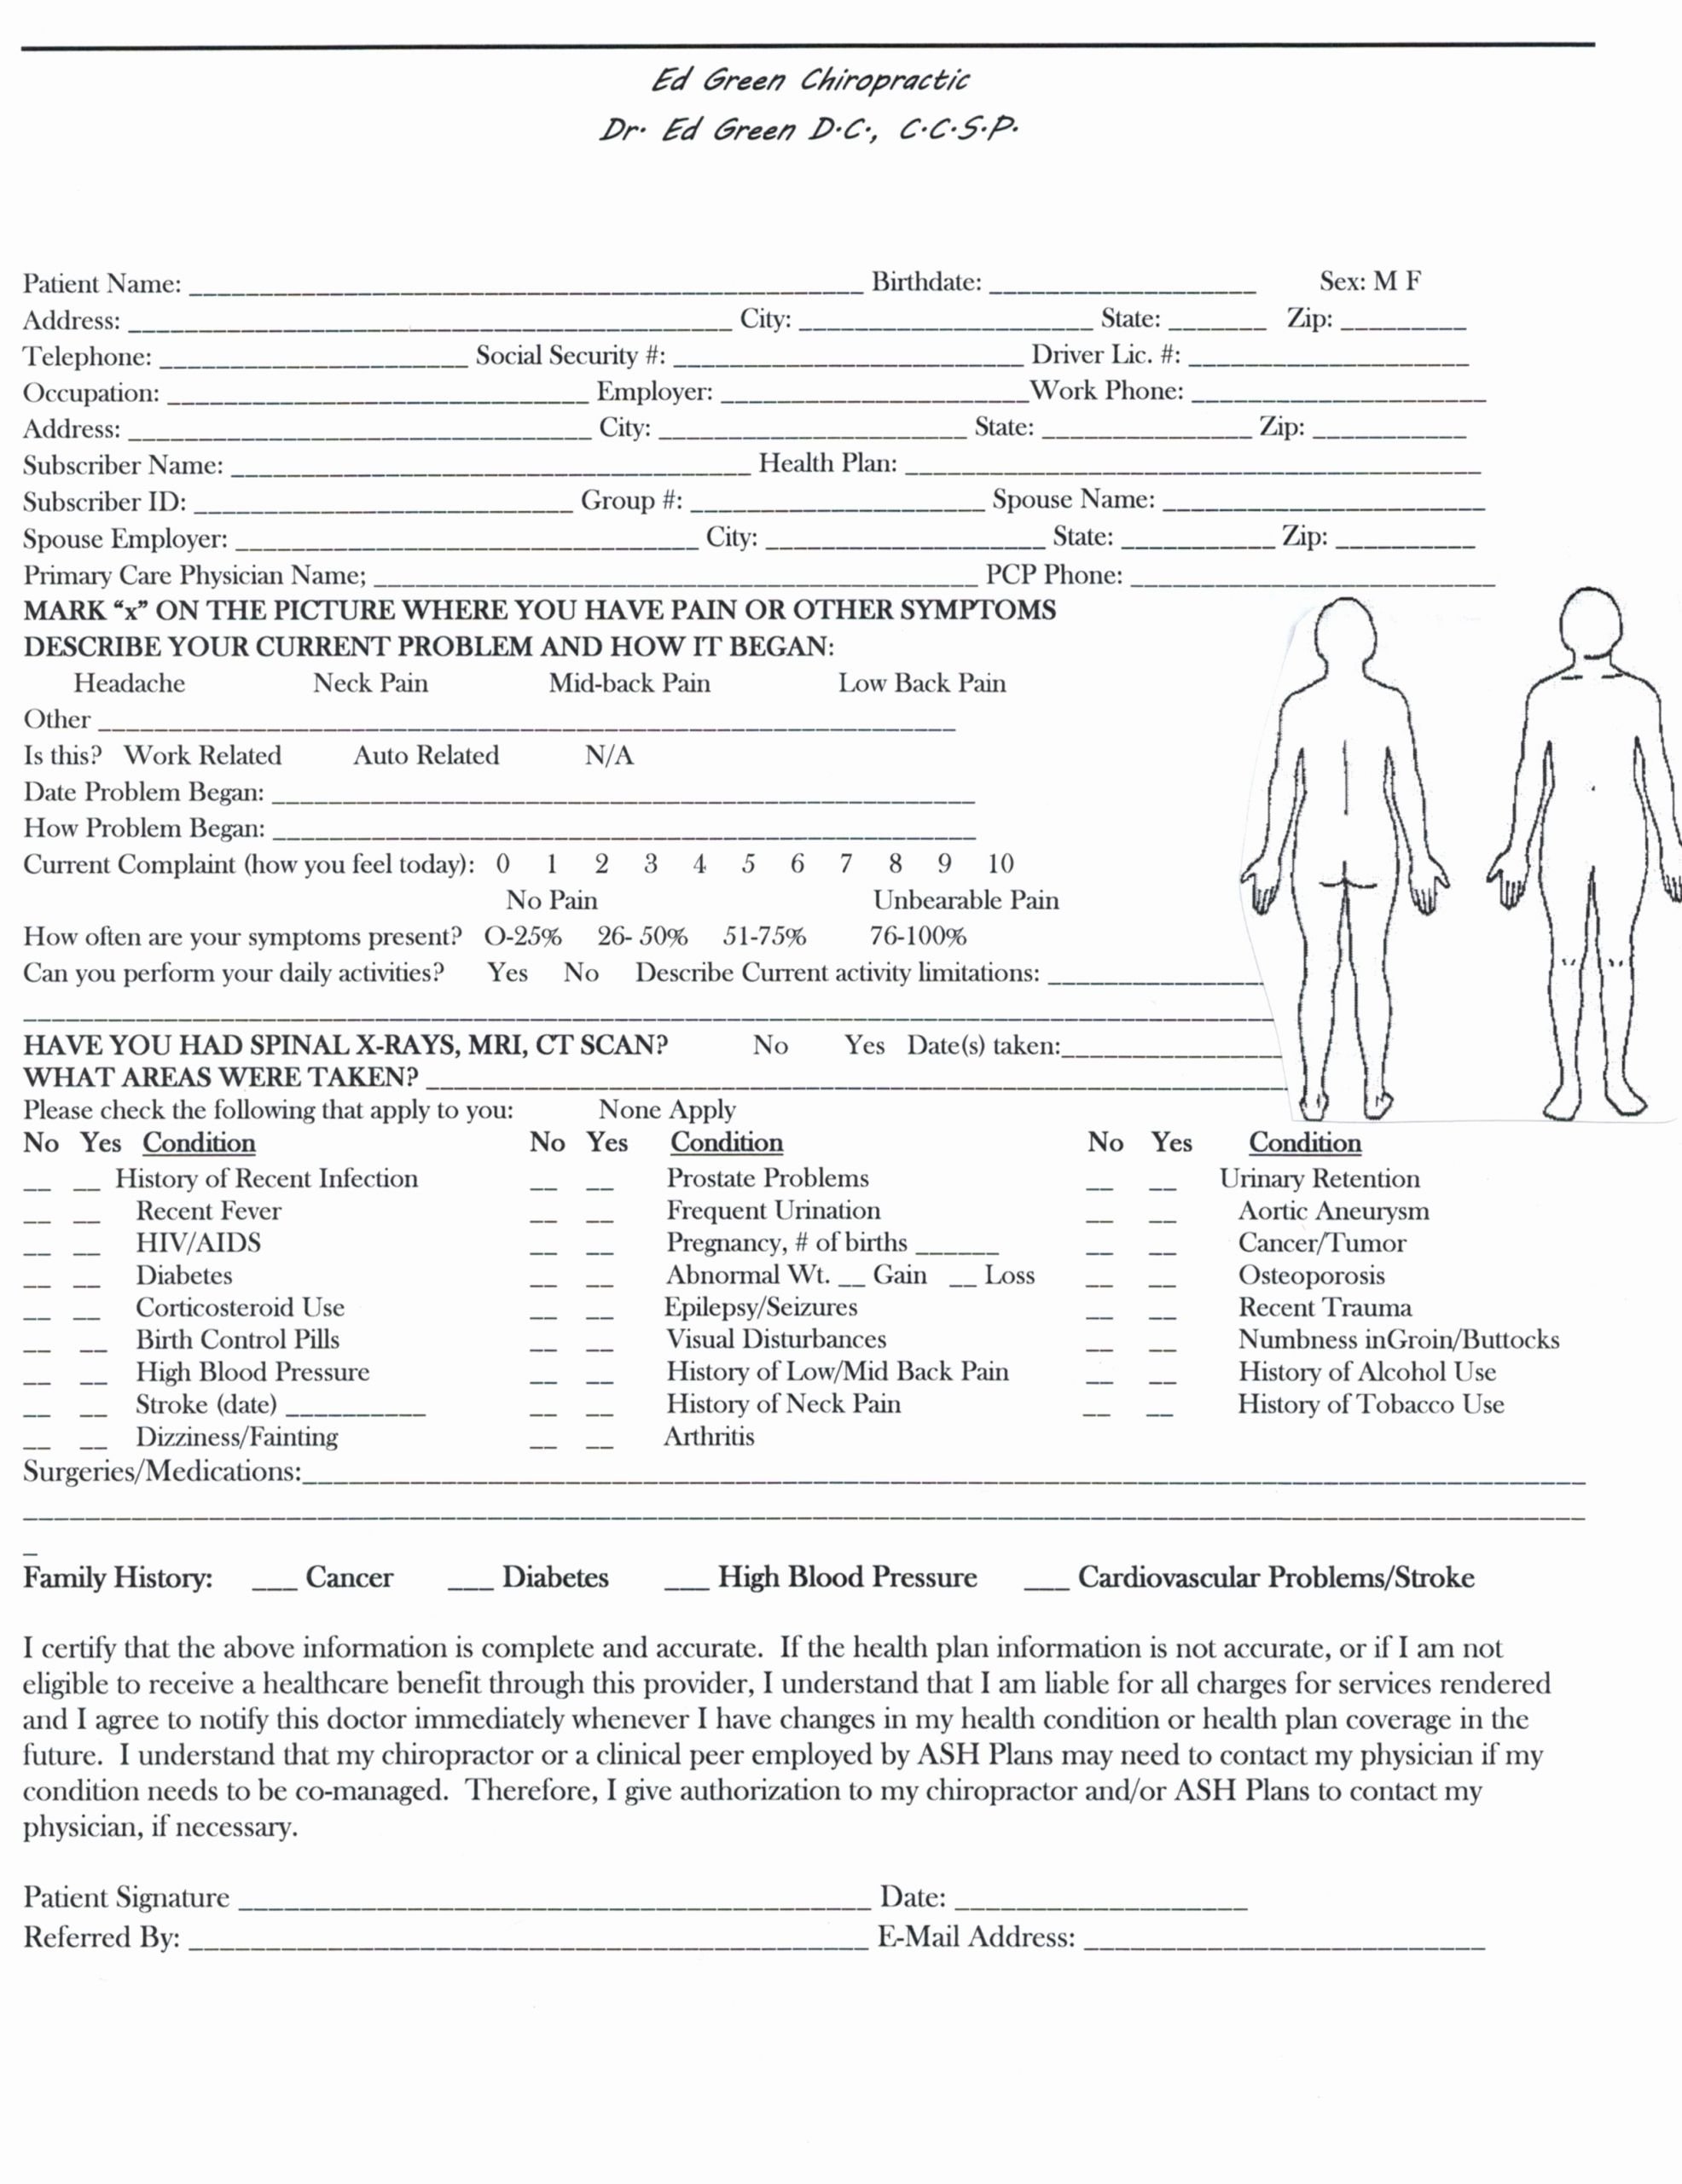 Patient Information Sheet Template Fresh Ed Green Chiropractic What is Chiropractic